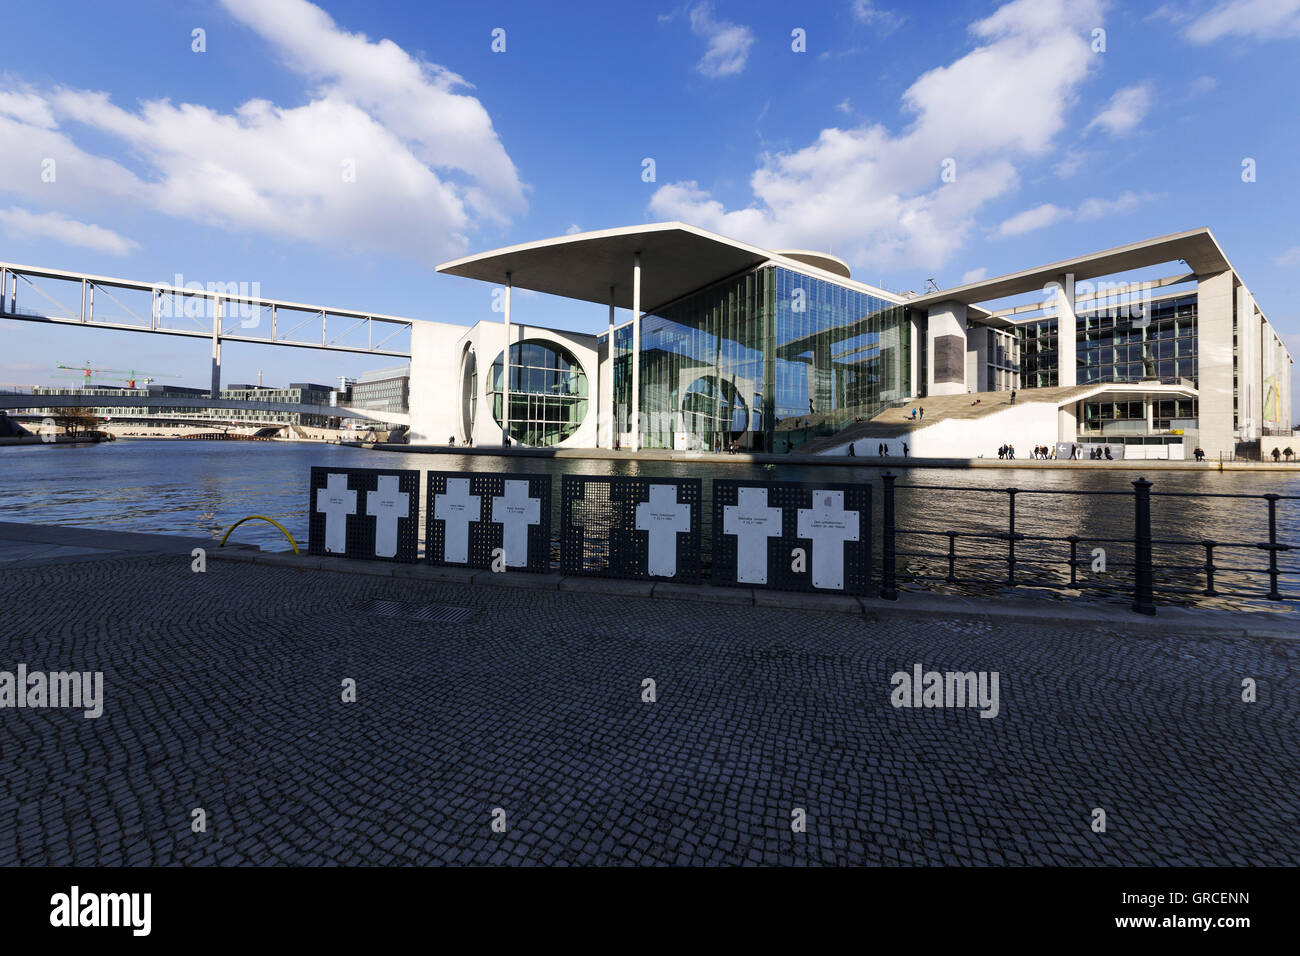 Crosses For Wall Victims On The River Spree In Berlin Before The House Stock Photo